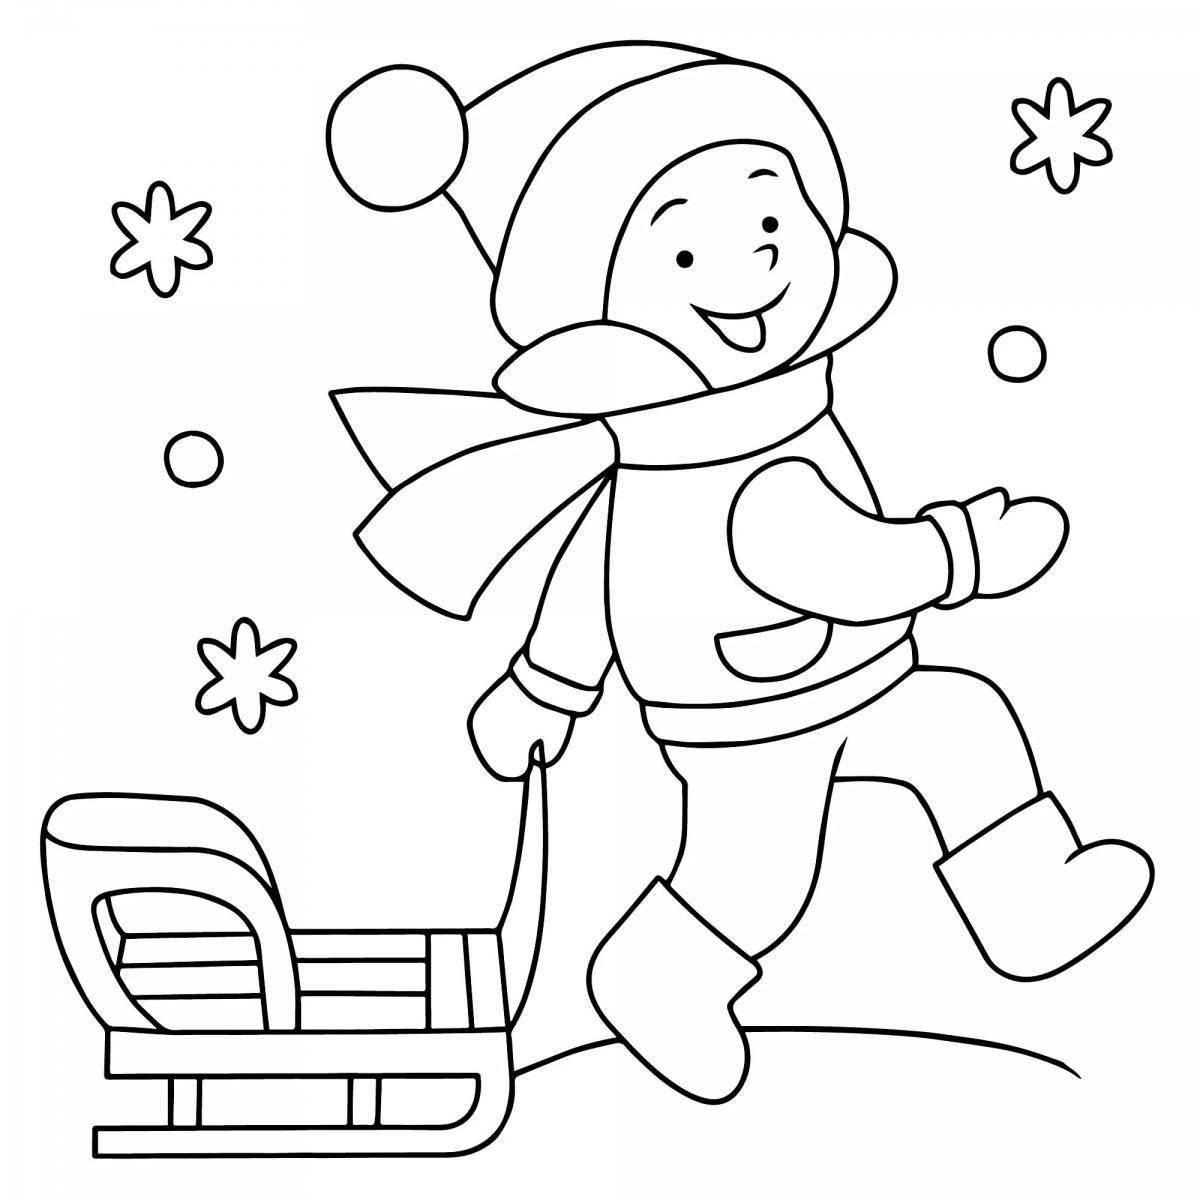 Fun winter coloring book for 2-3 year olds